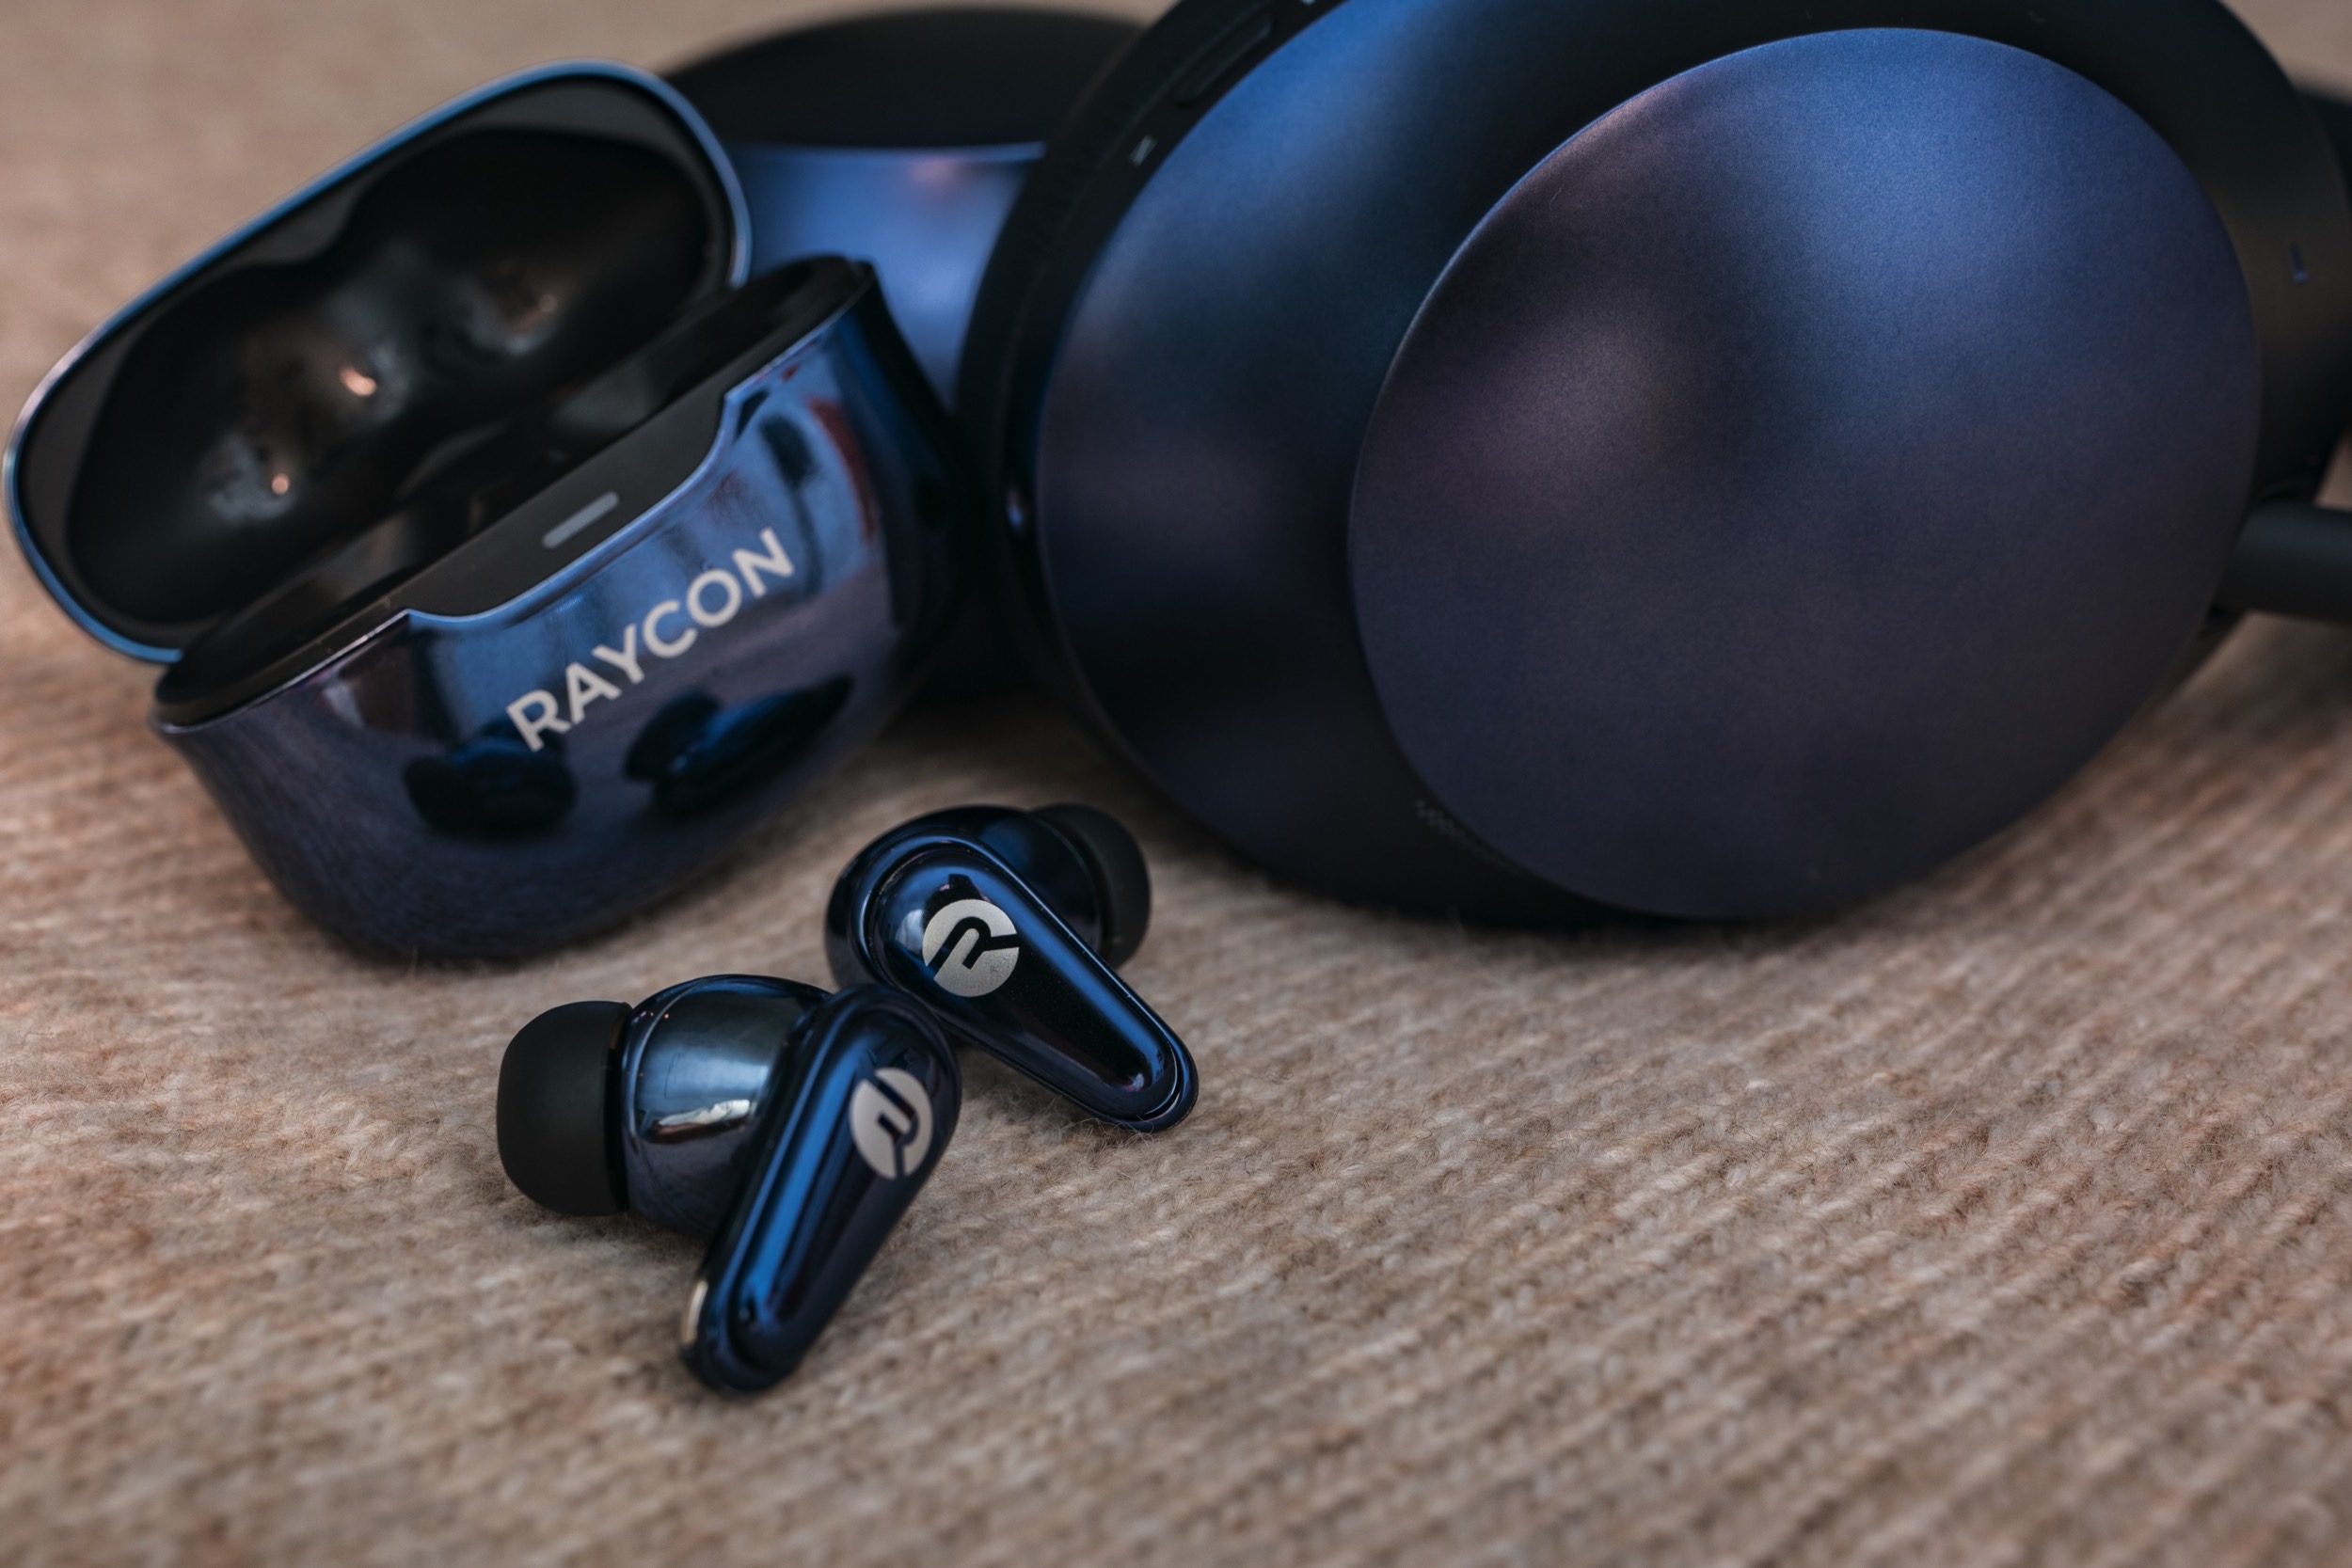 Raycon Everyday Pro earbuds and headphones.